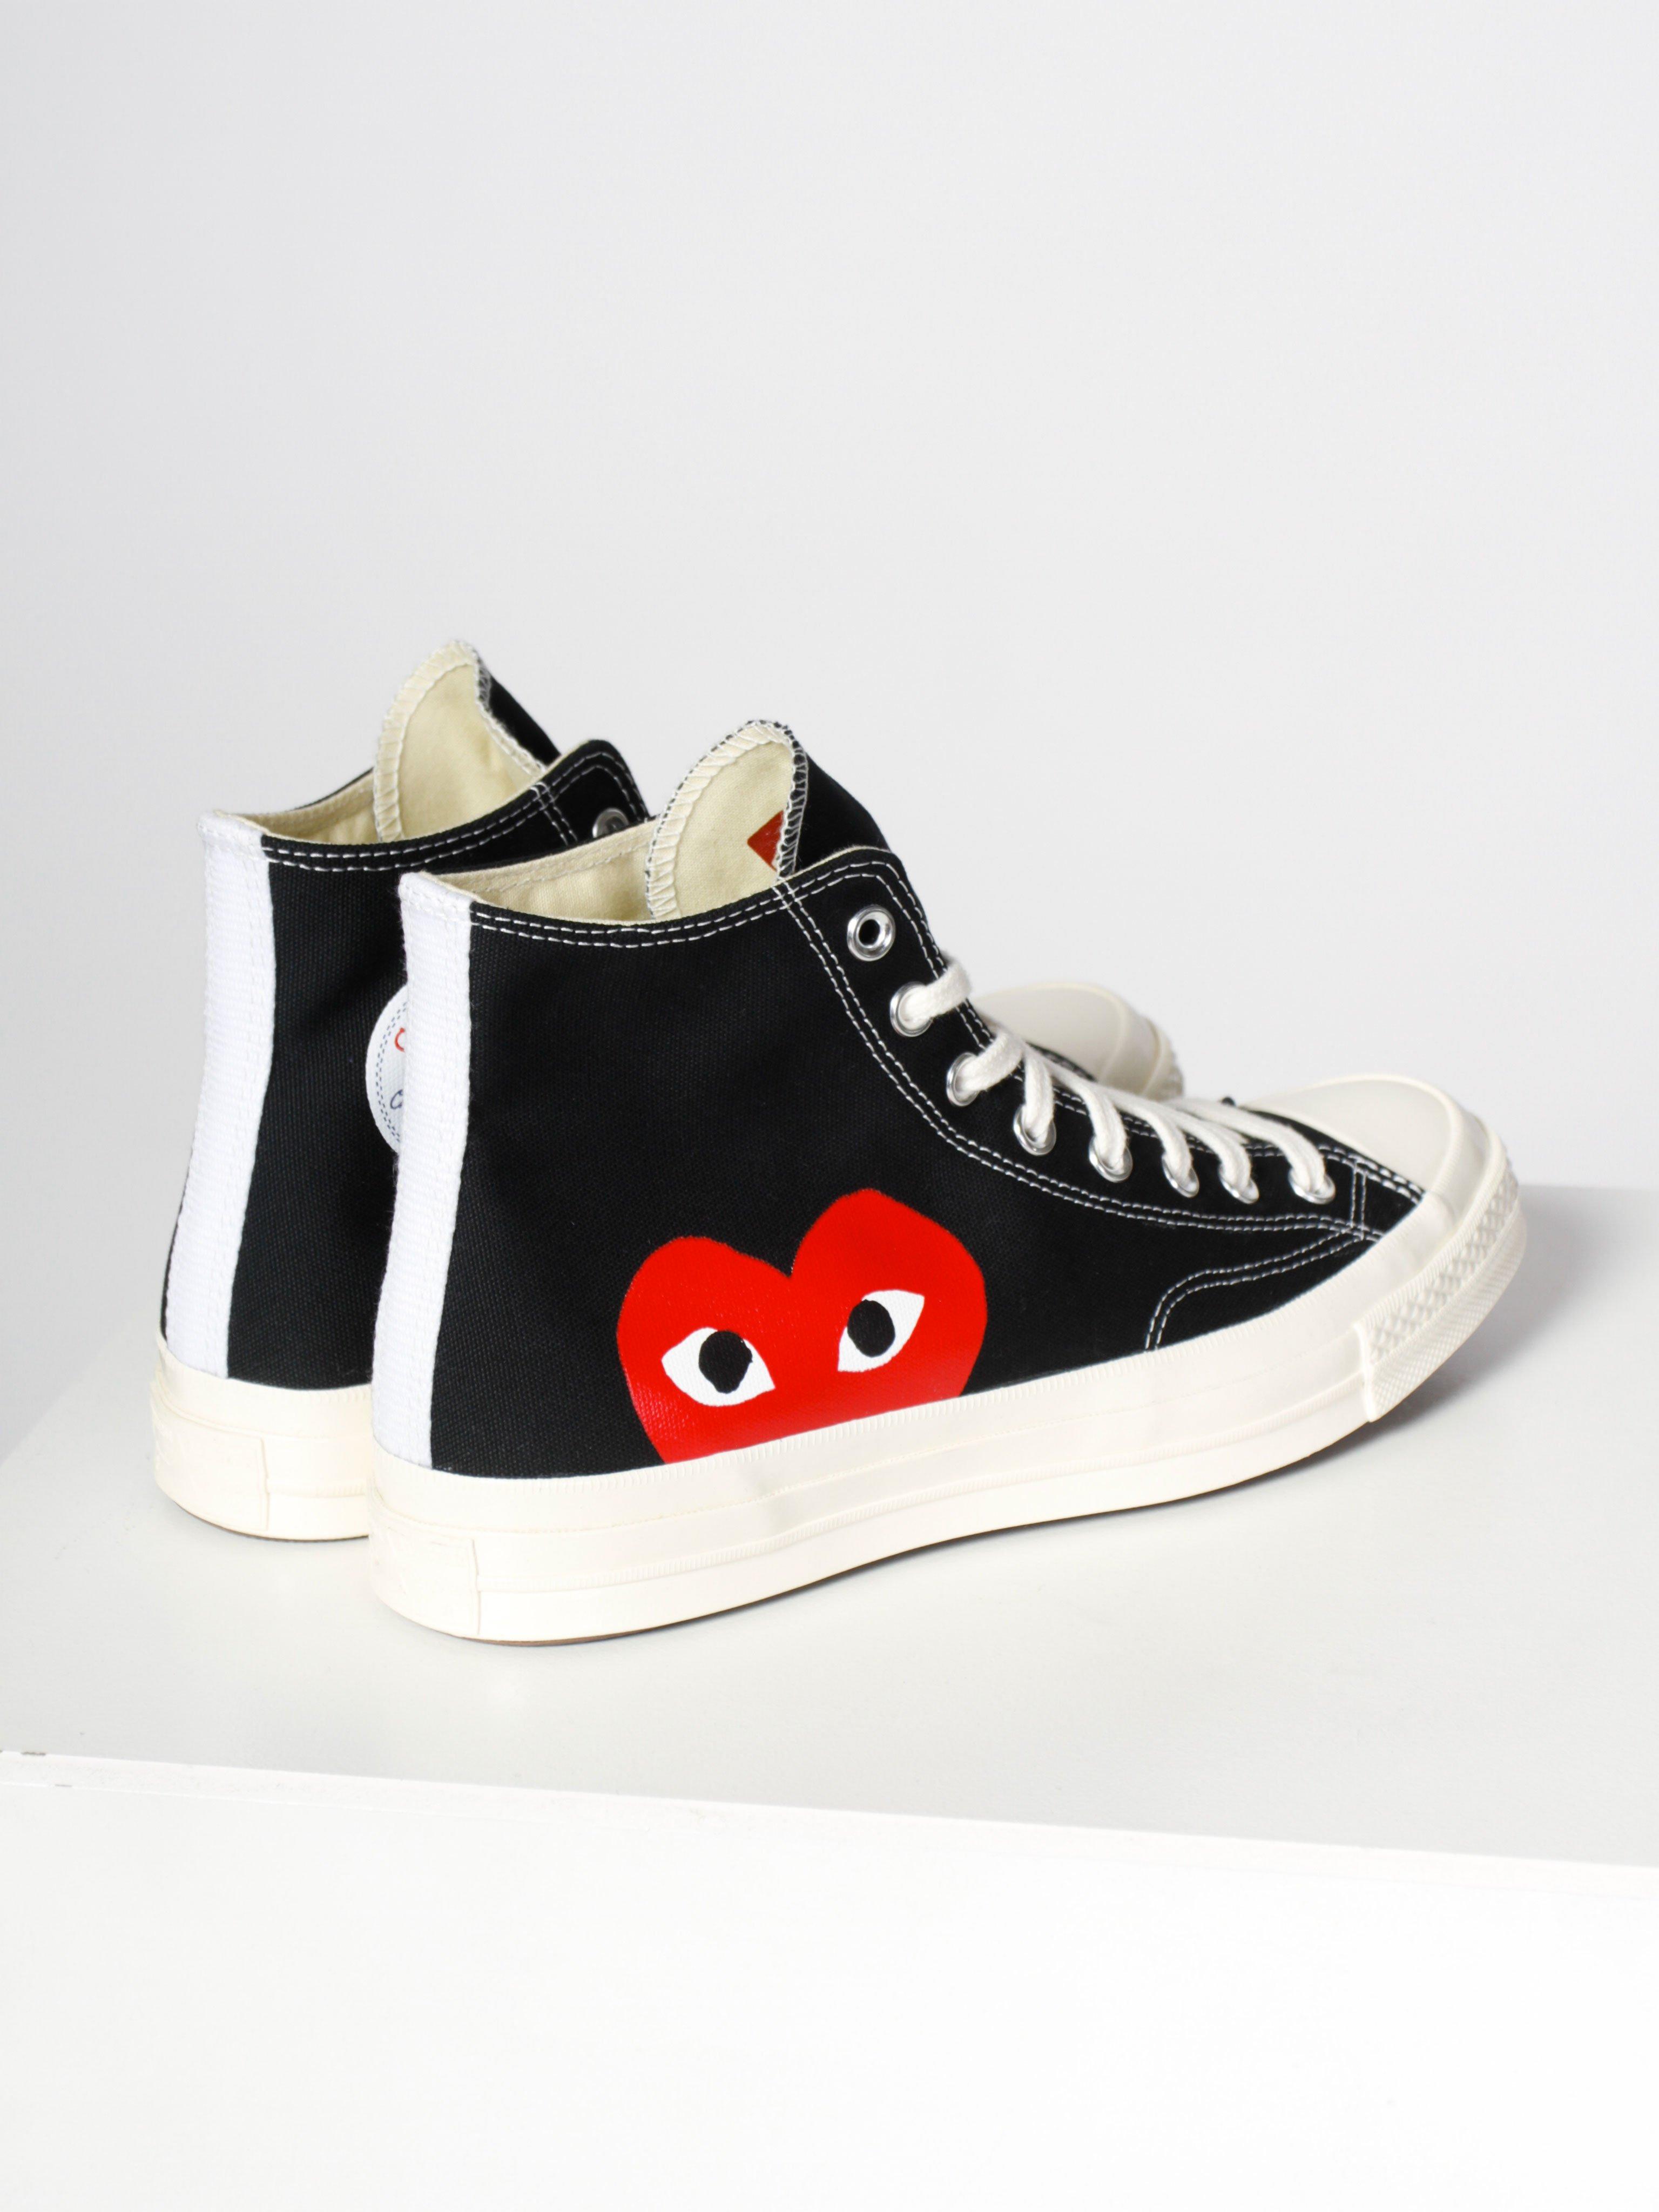 converse black with red heart